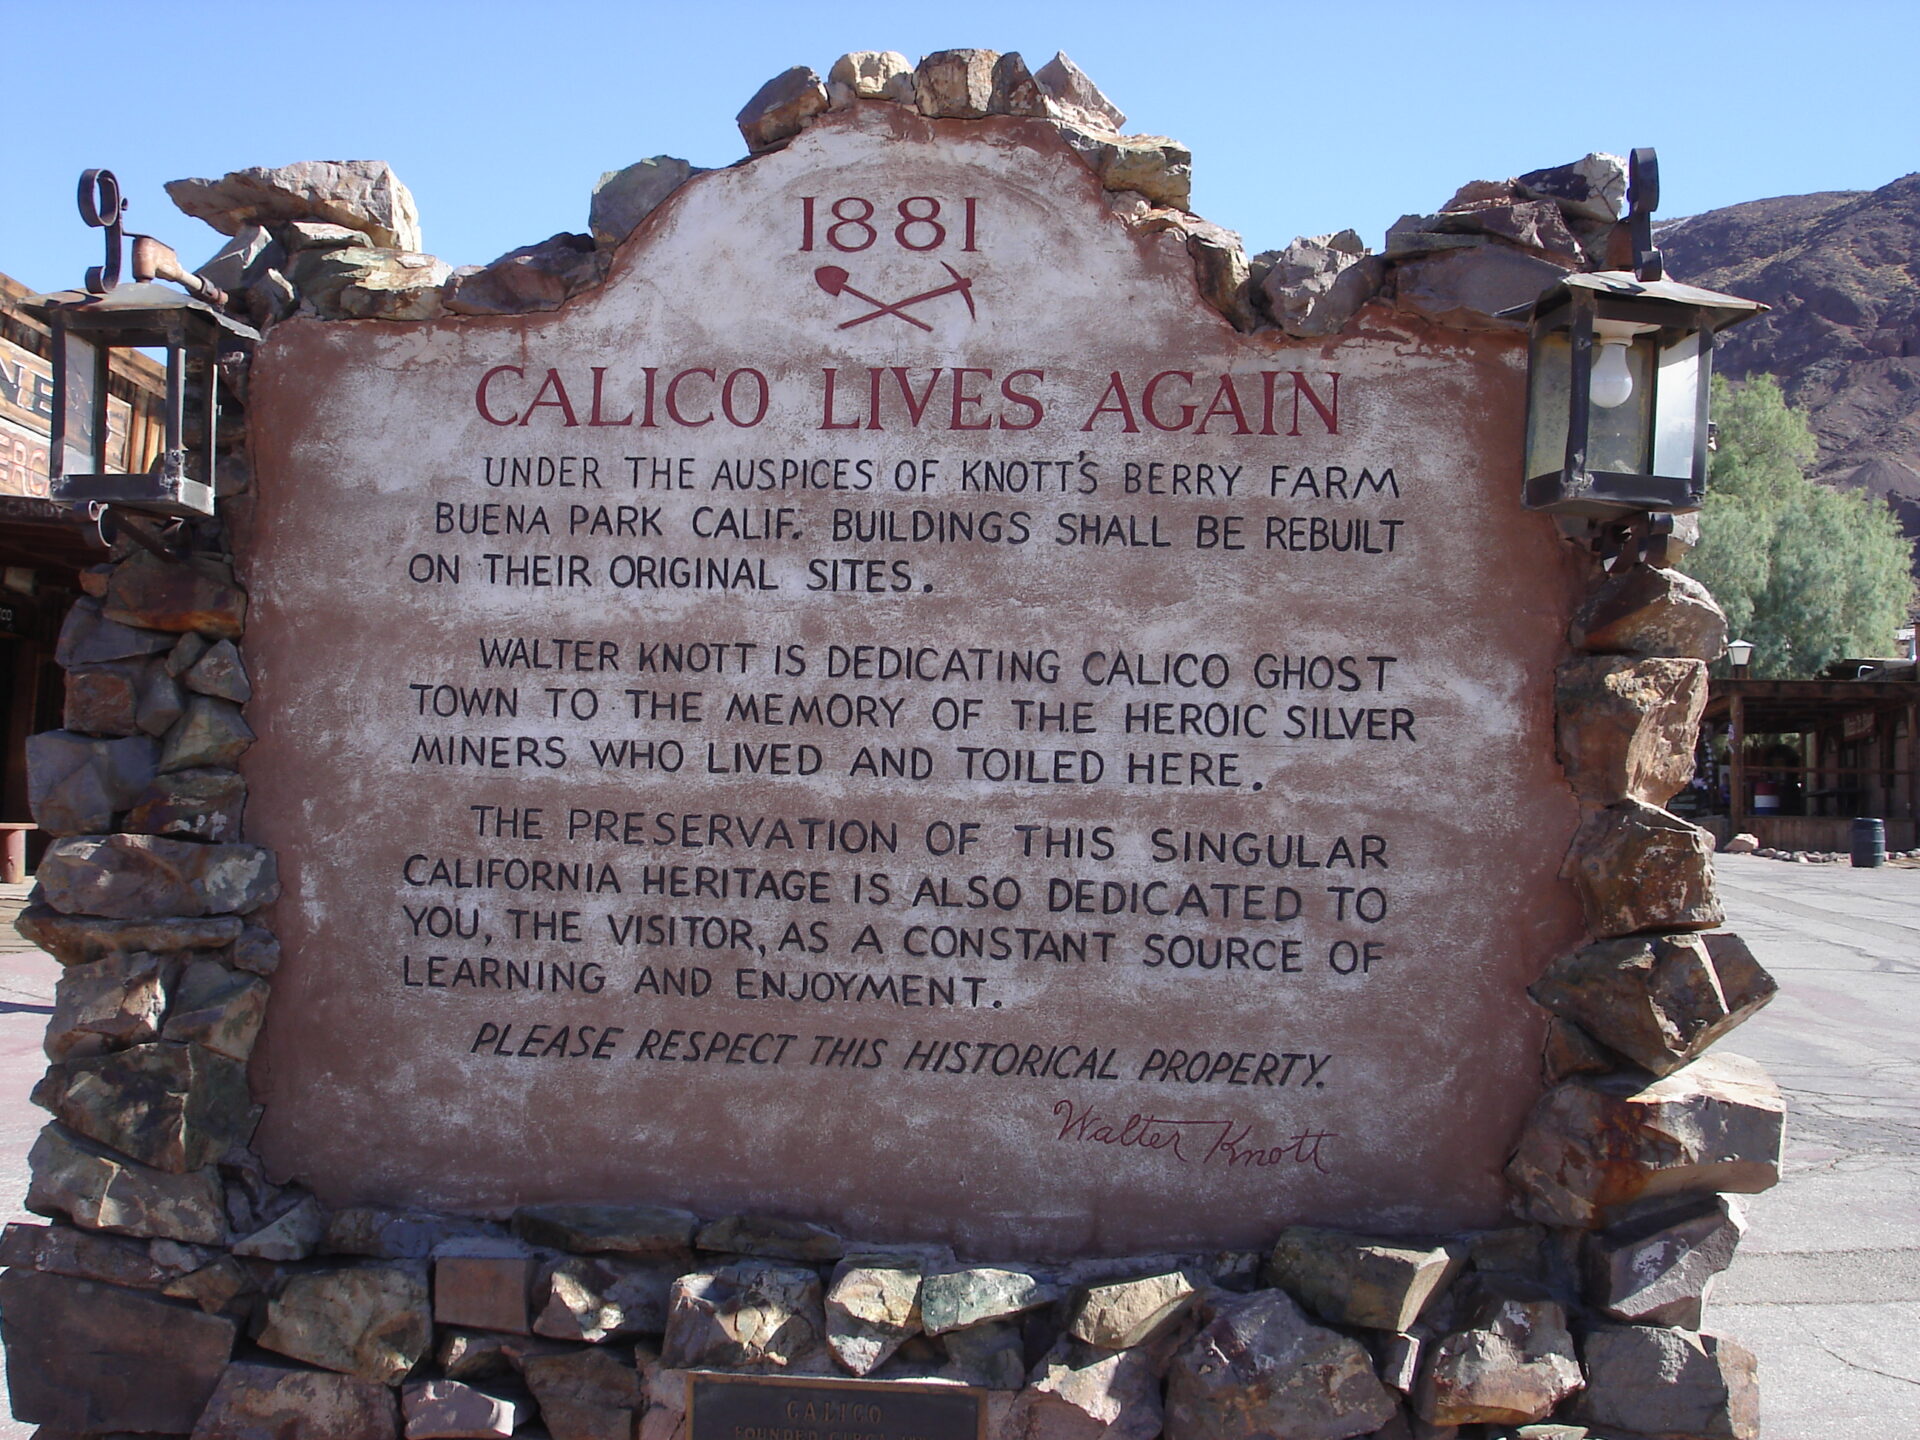 Calico ghost town | Rondreis zuidwest amerika